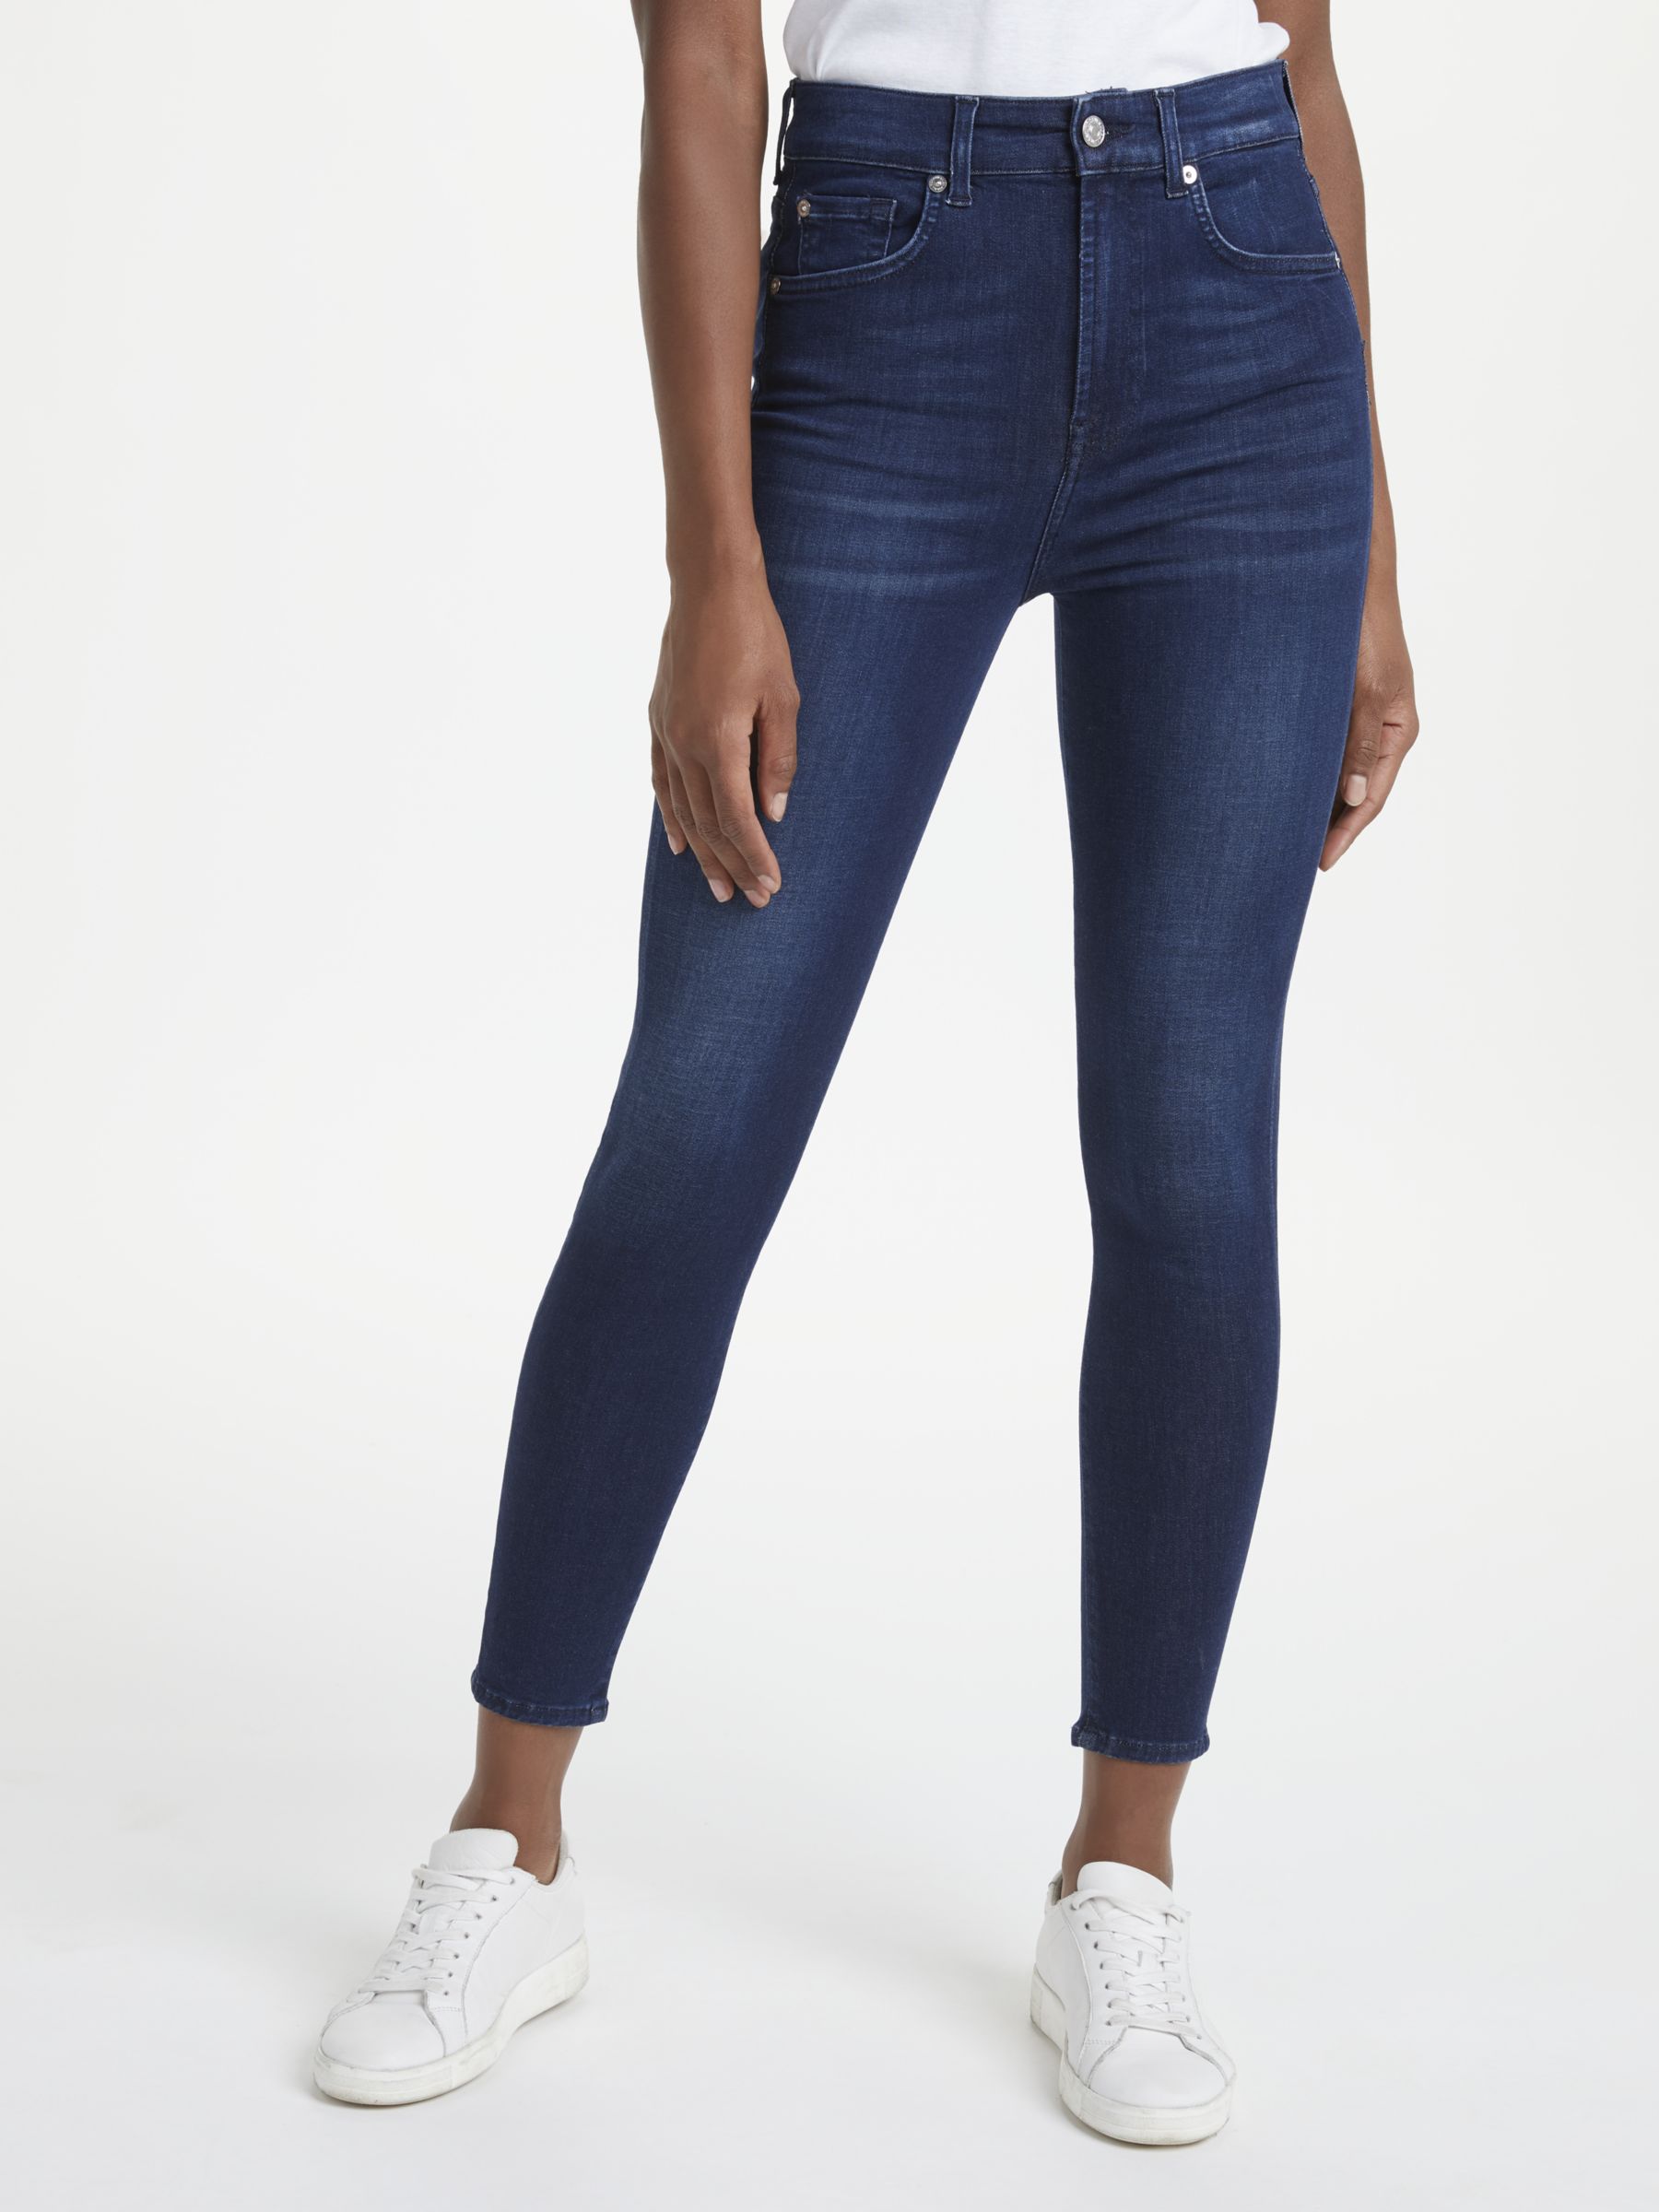 7 for all mankind womens jeans